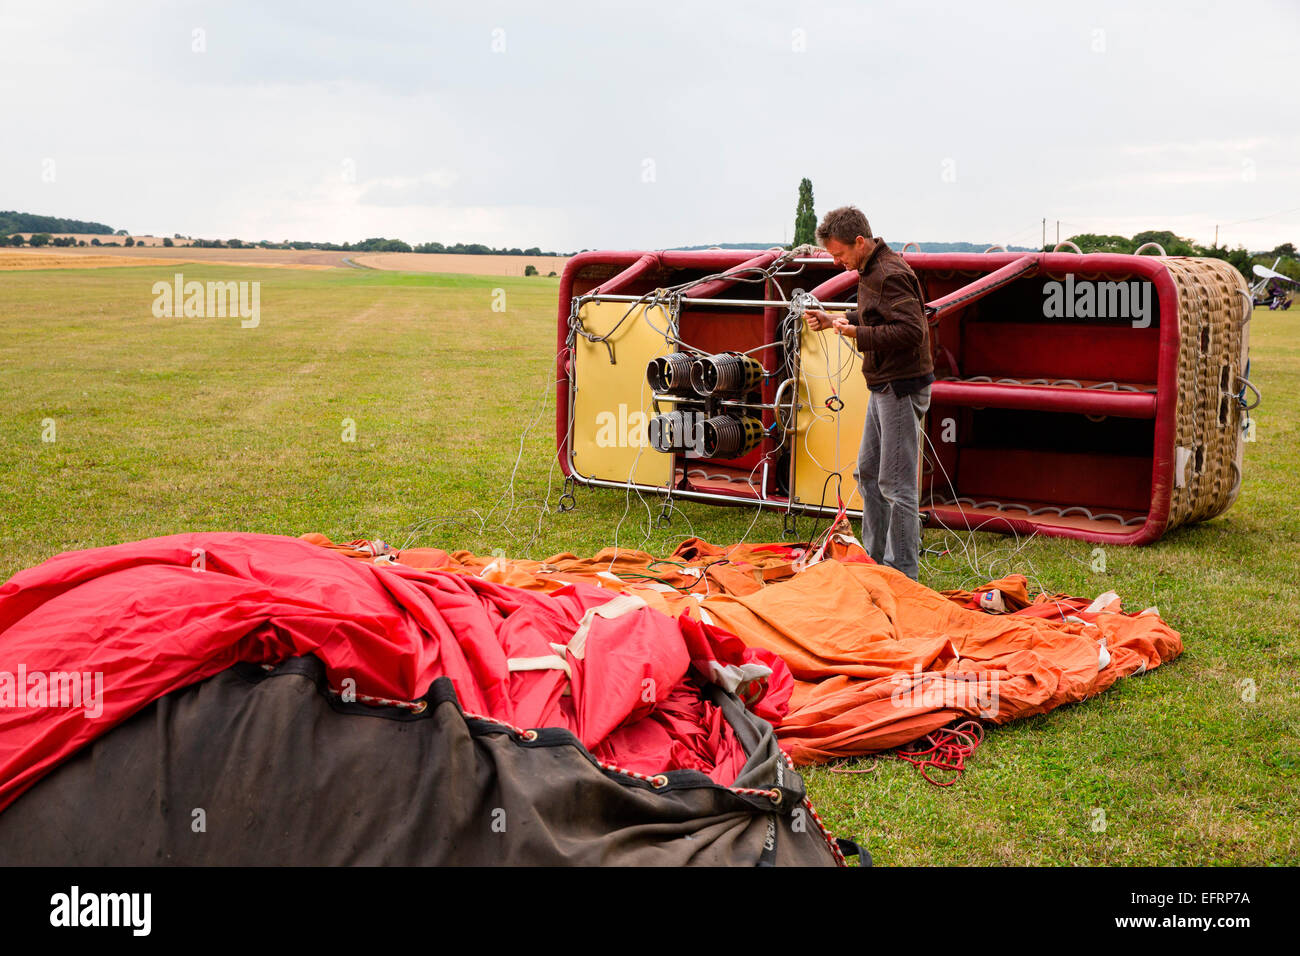 Man securing ropes and rigging for hot air balloon envelope and basket in field, South Oxfordshire, England Stock Photo